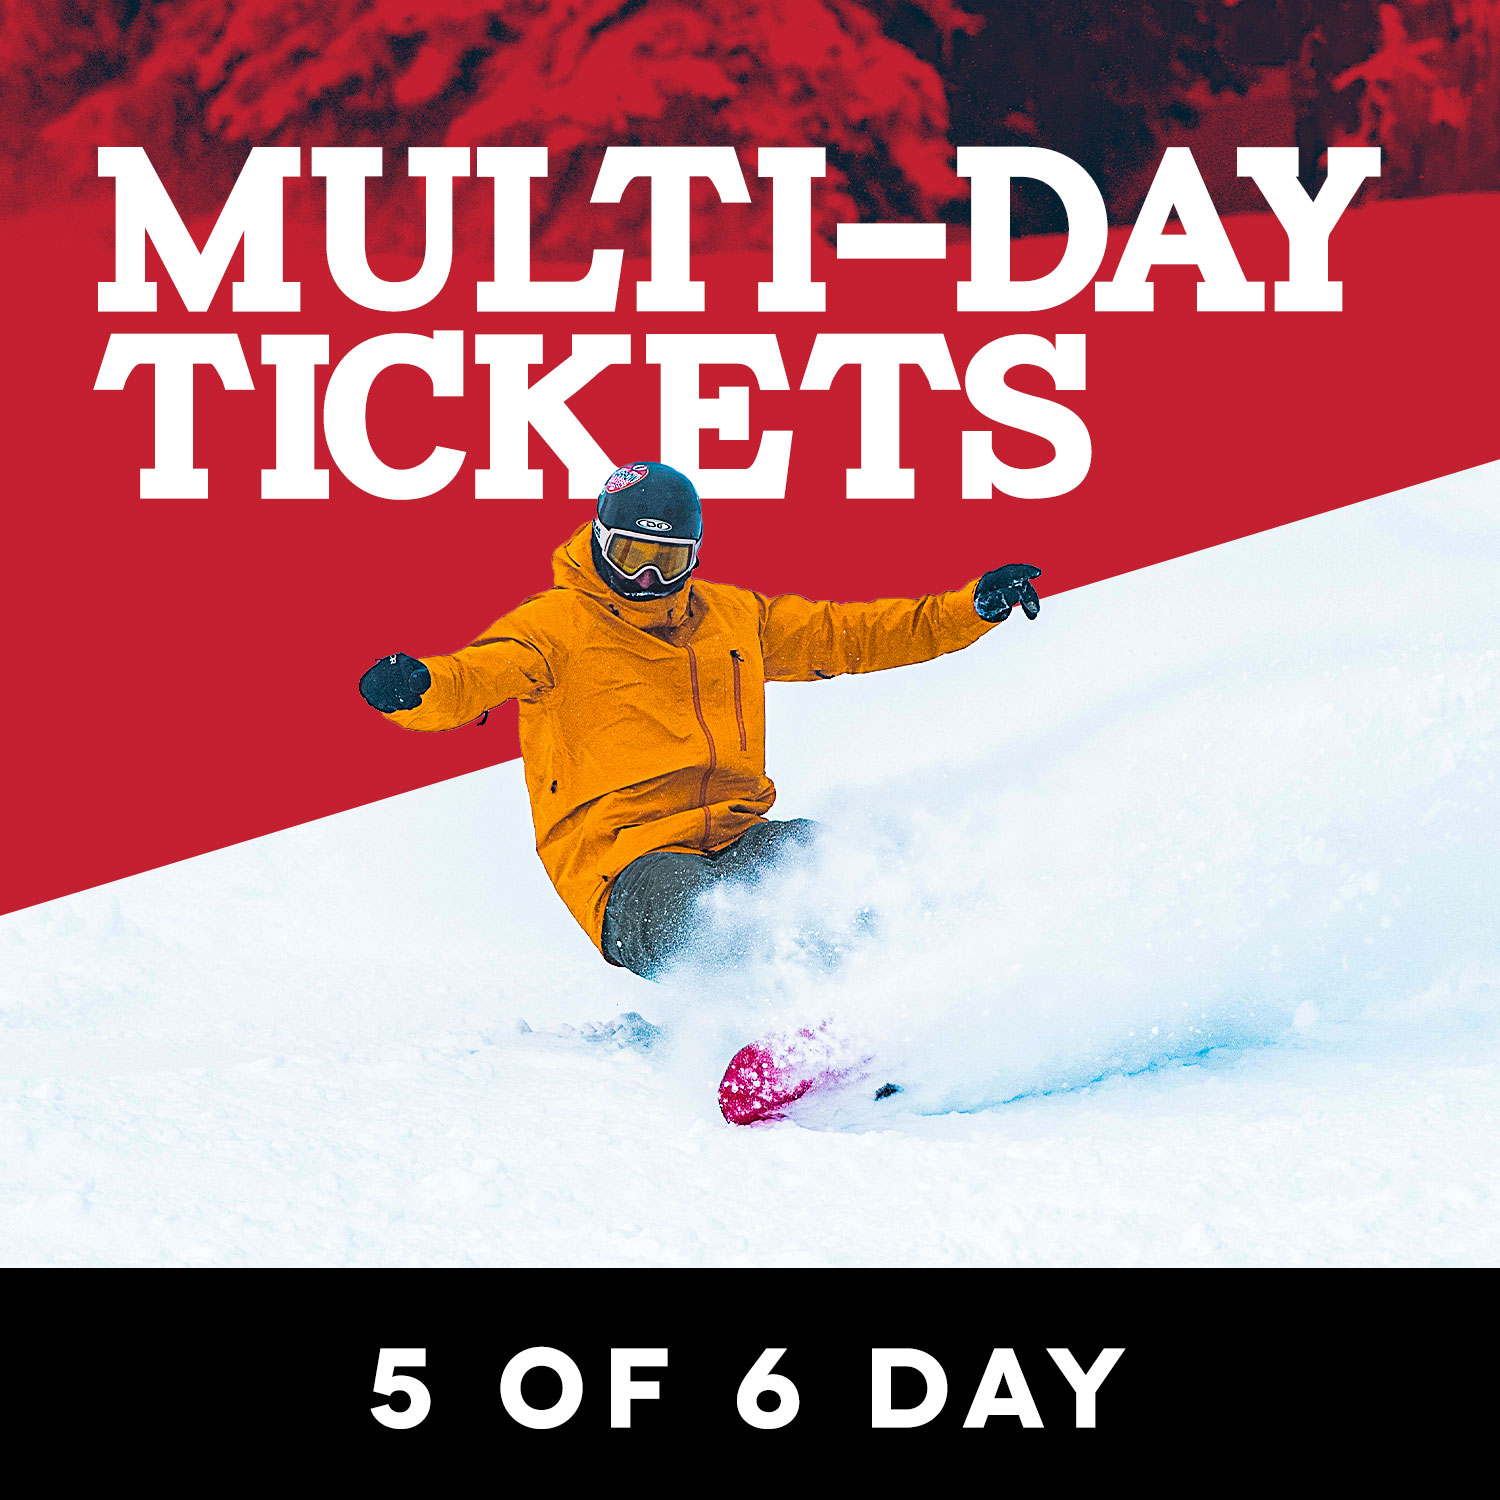 → 5 of 6 Day Ticket